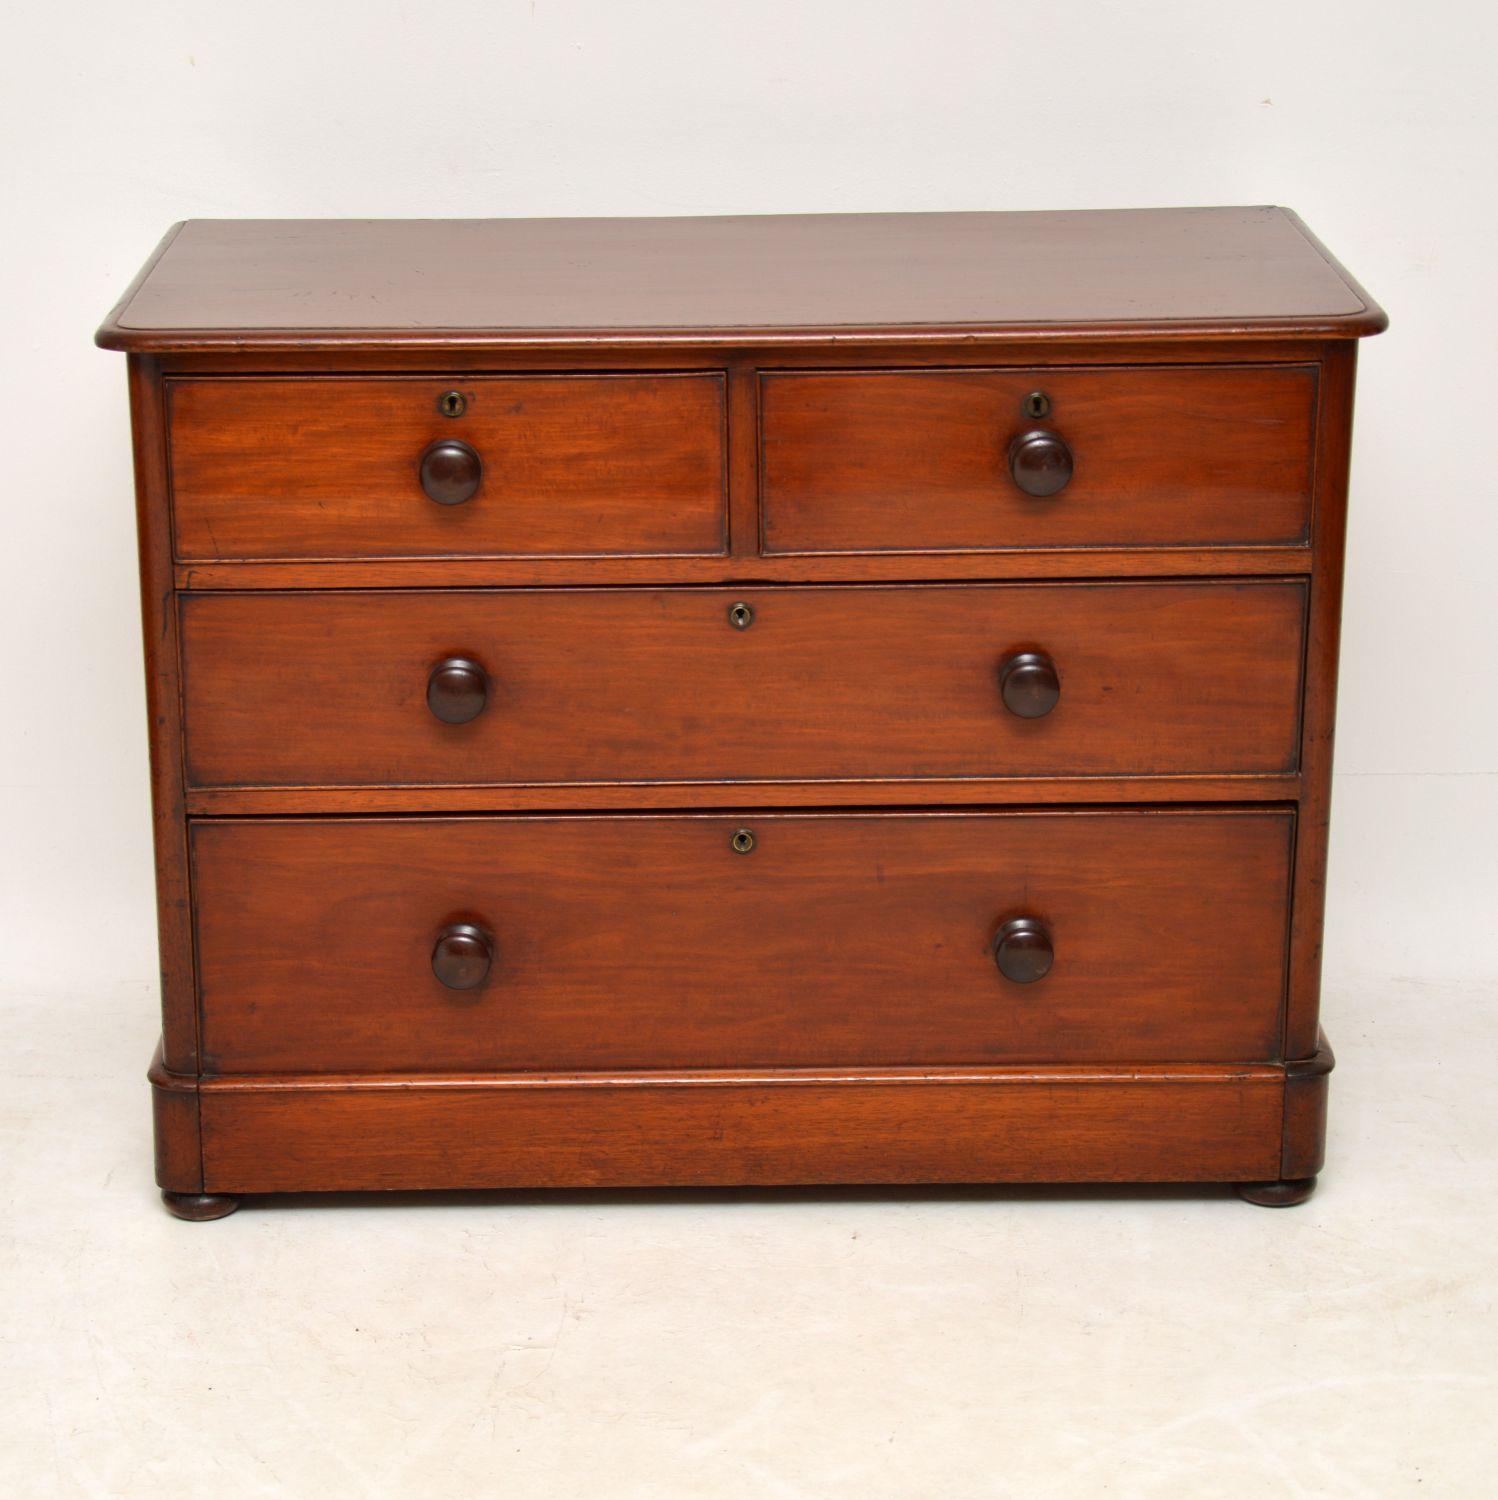 This antique Victorian mahogany chest of drawers has nice proportions, being a bit lower & wider than most. It has a solid mahogany top, original mahogany bun handles and sits on a plinth base with flat bun feet below. The locks and escutcheons are